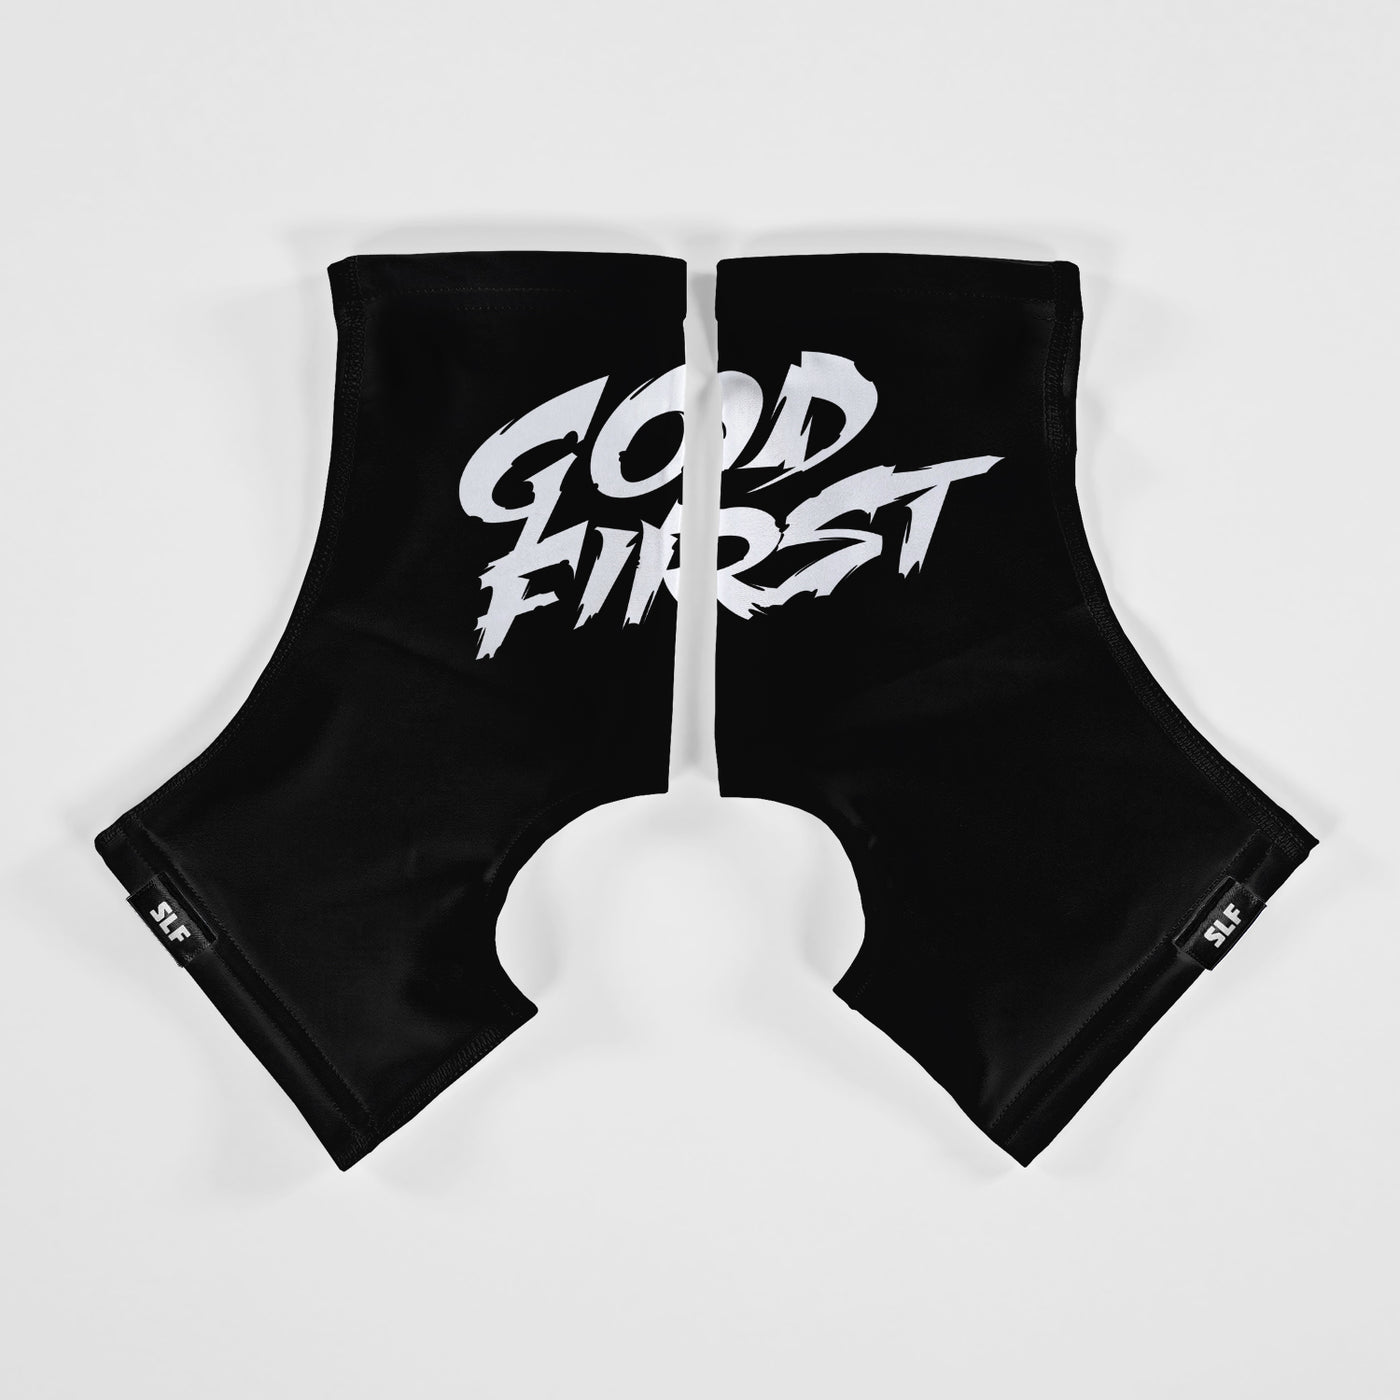 God First Black Spats / Cleat Covers